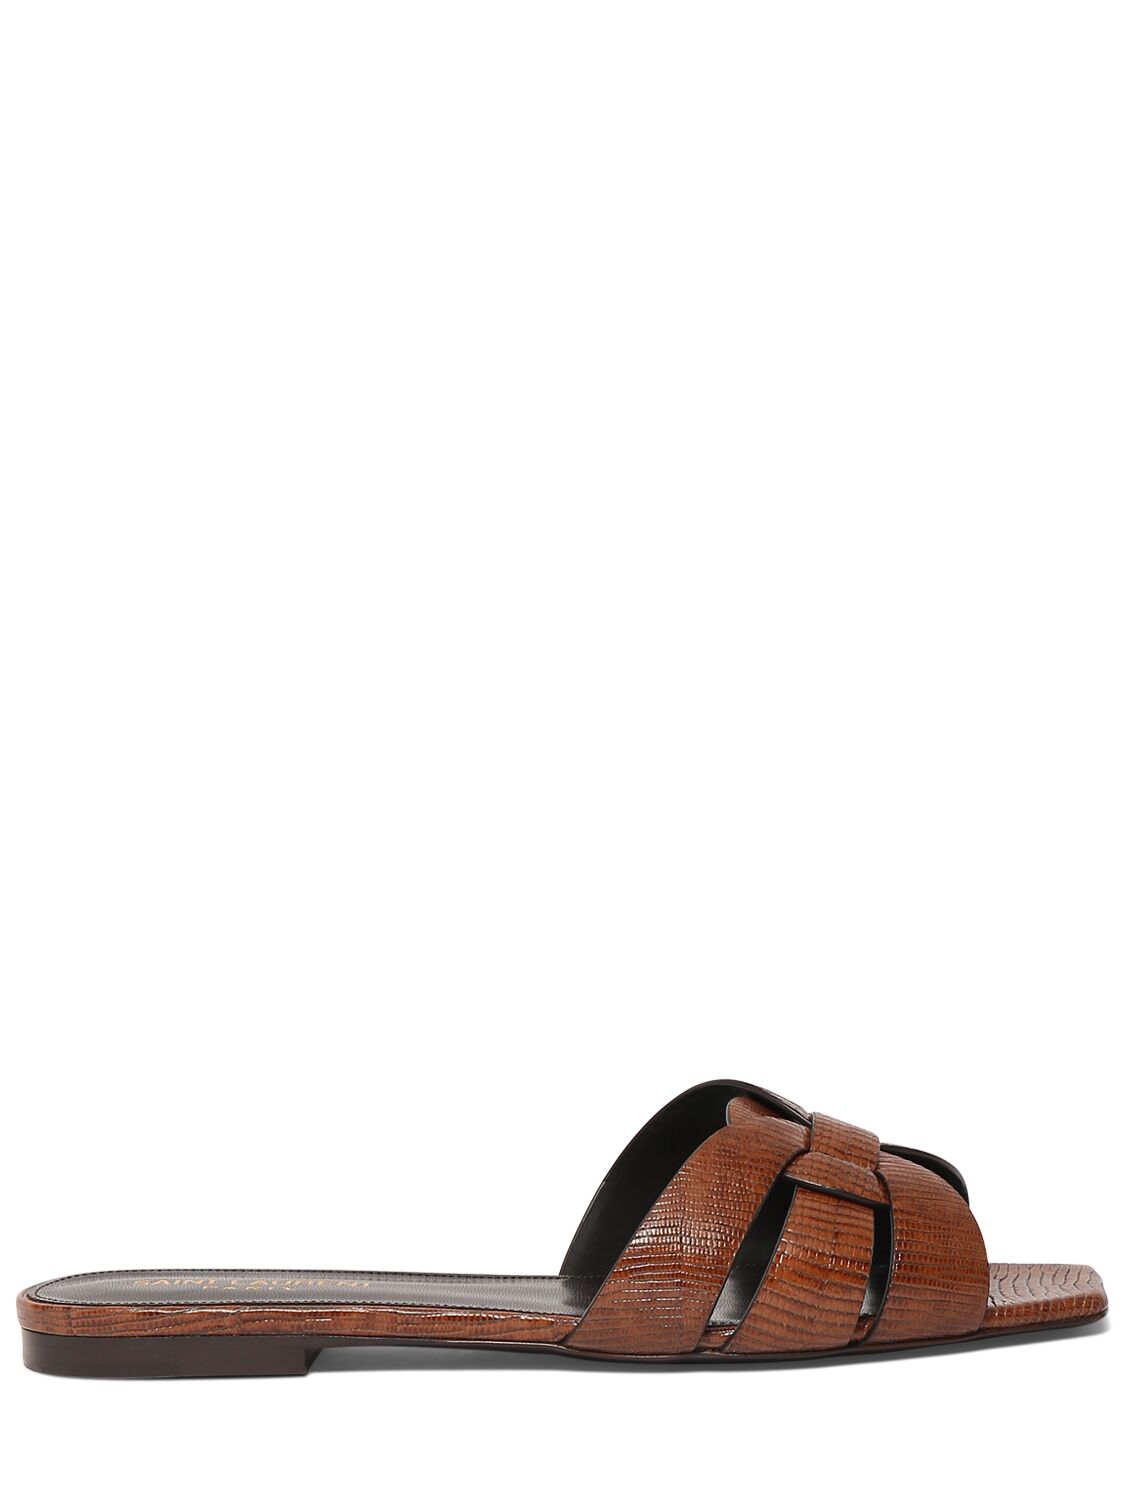 Saint Laurent 5mm Tribute Leather Flat Sandals In Almond Brown